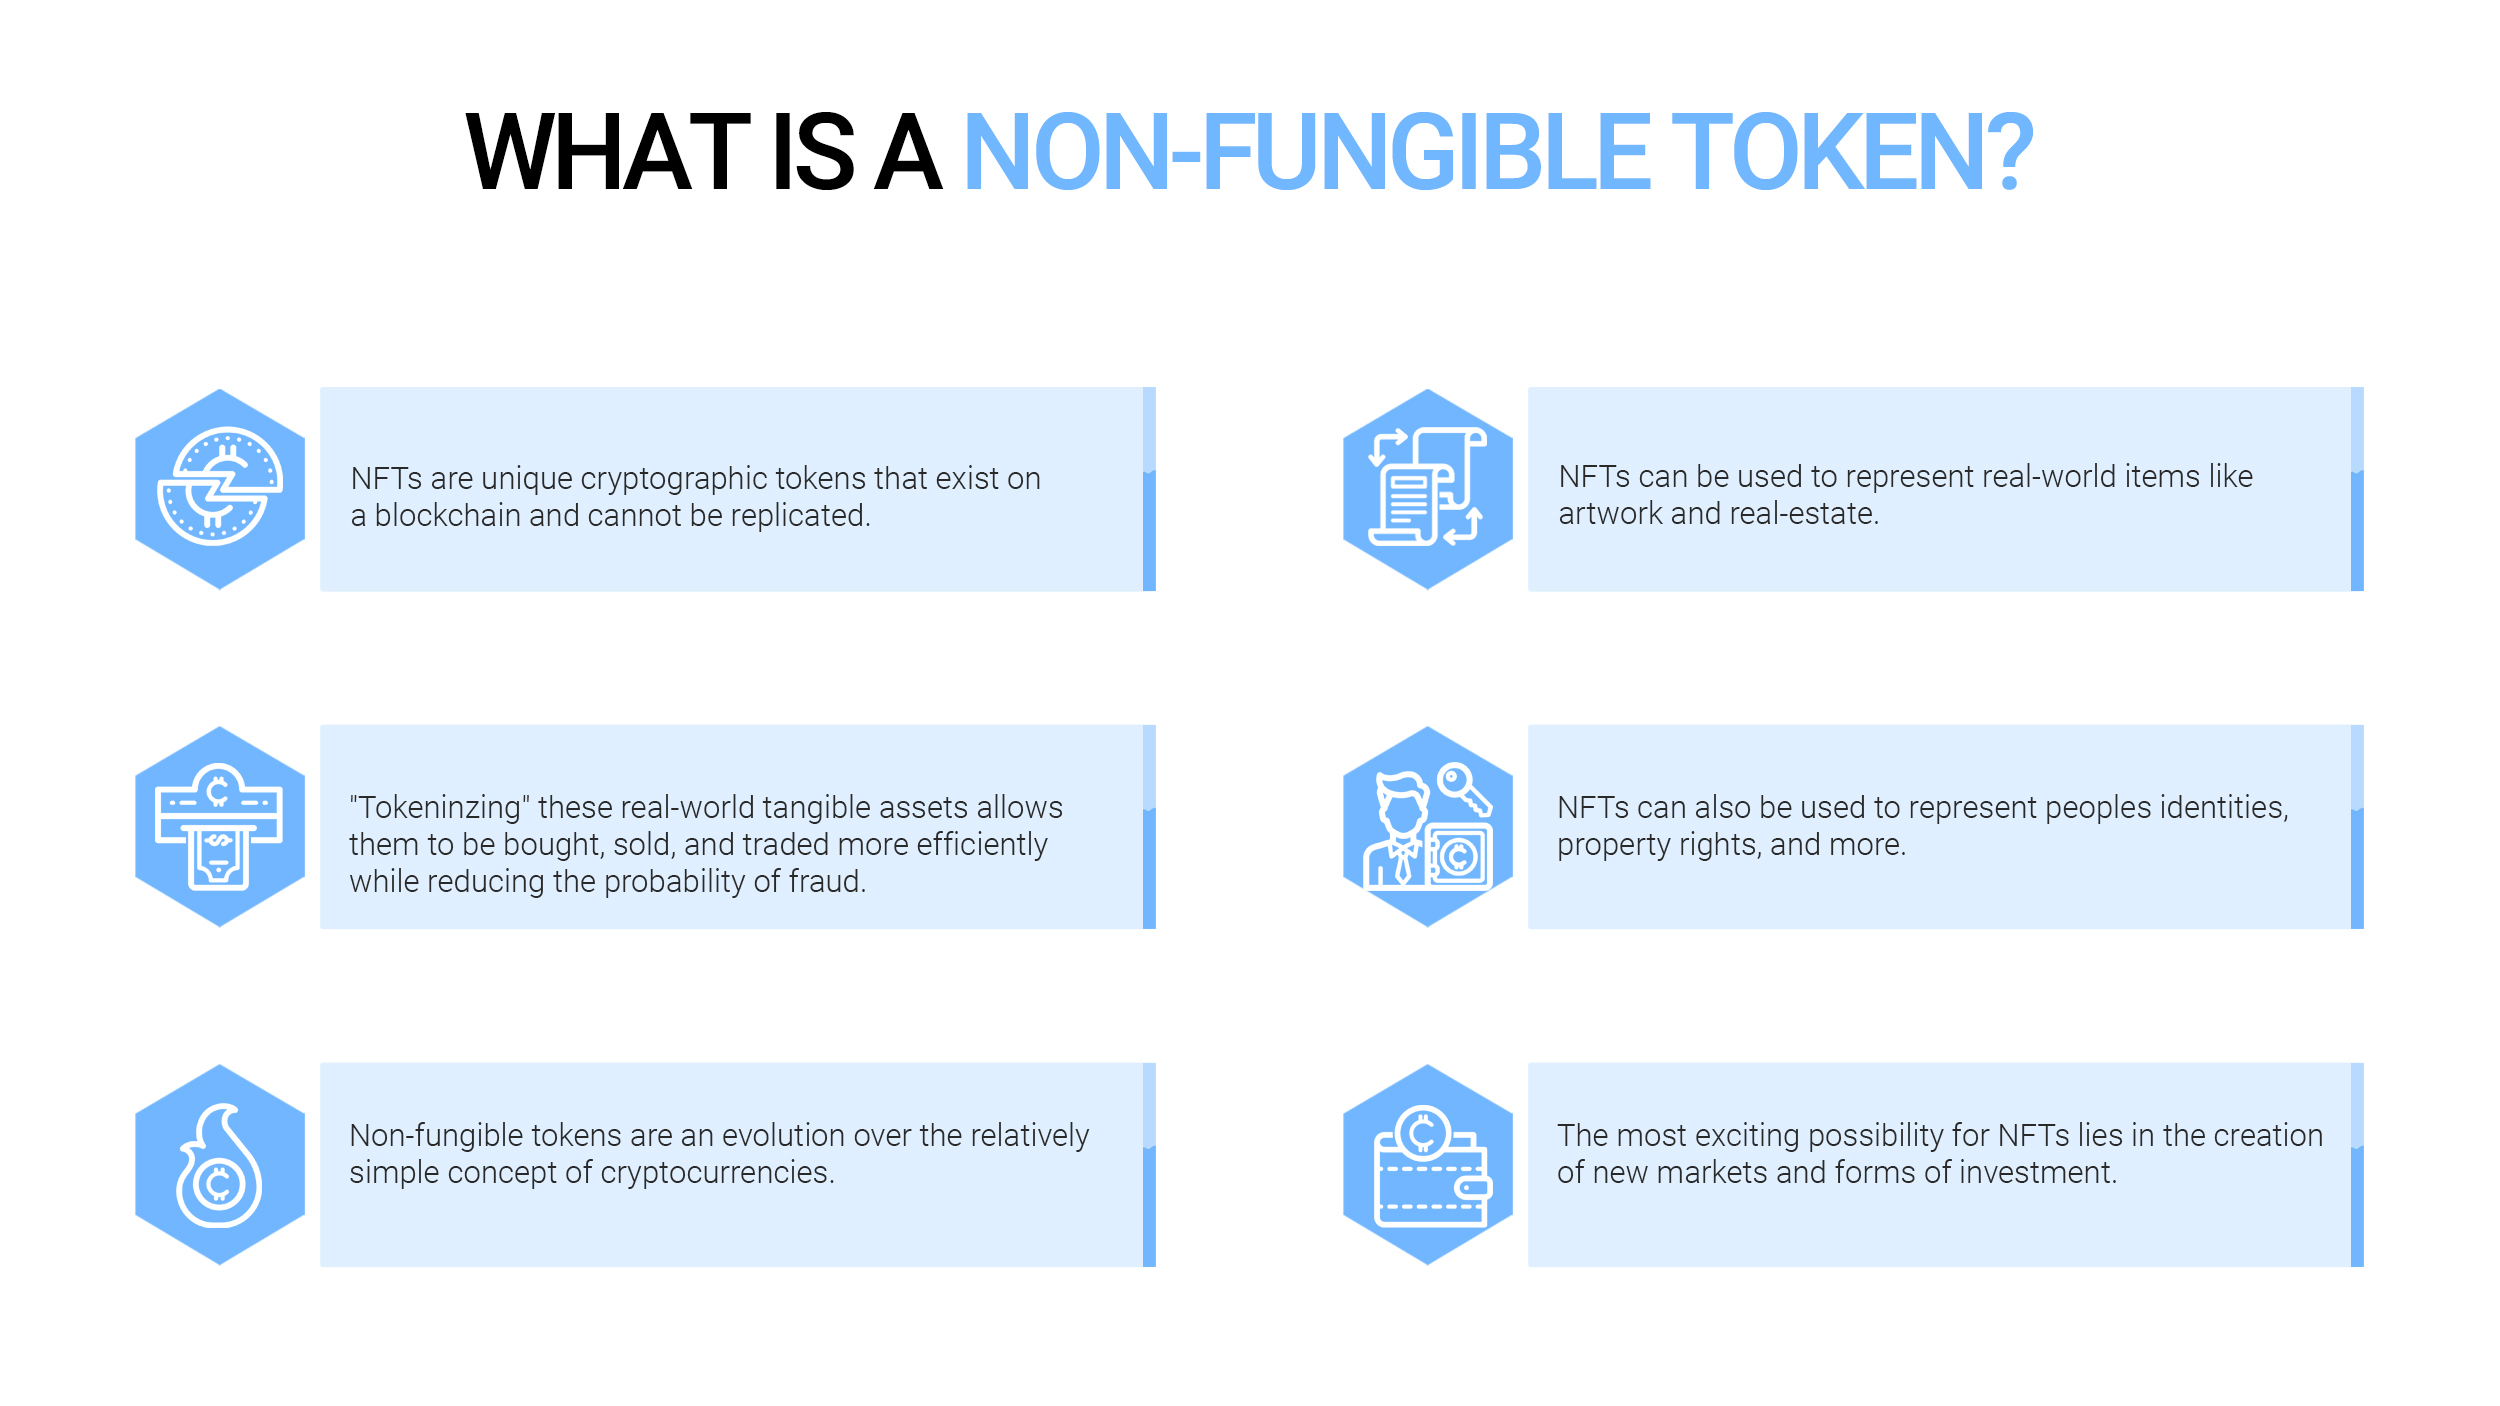 What is a non-fungible token